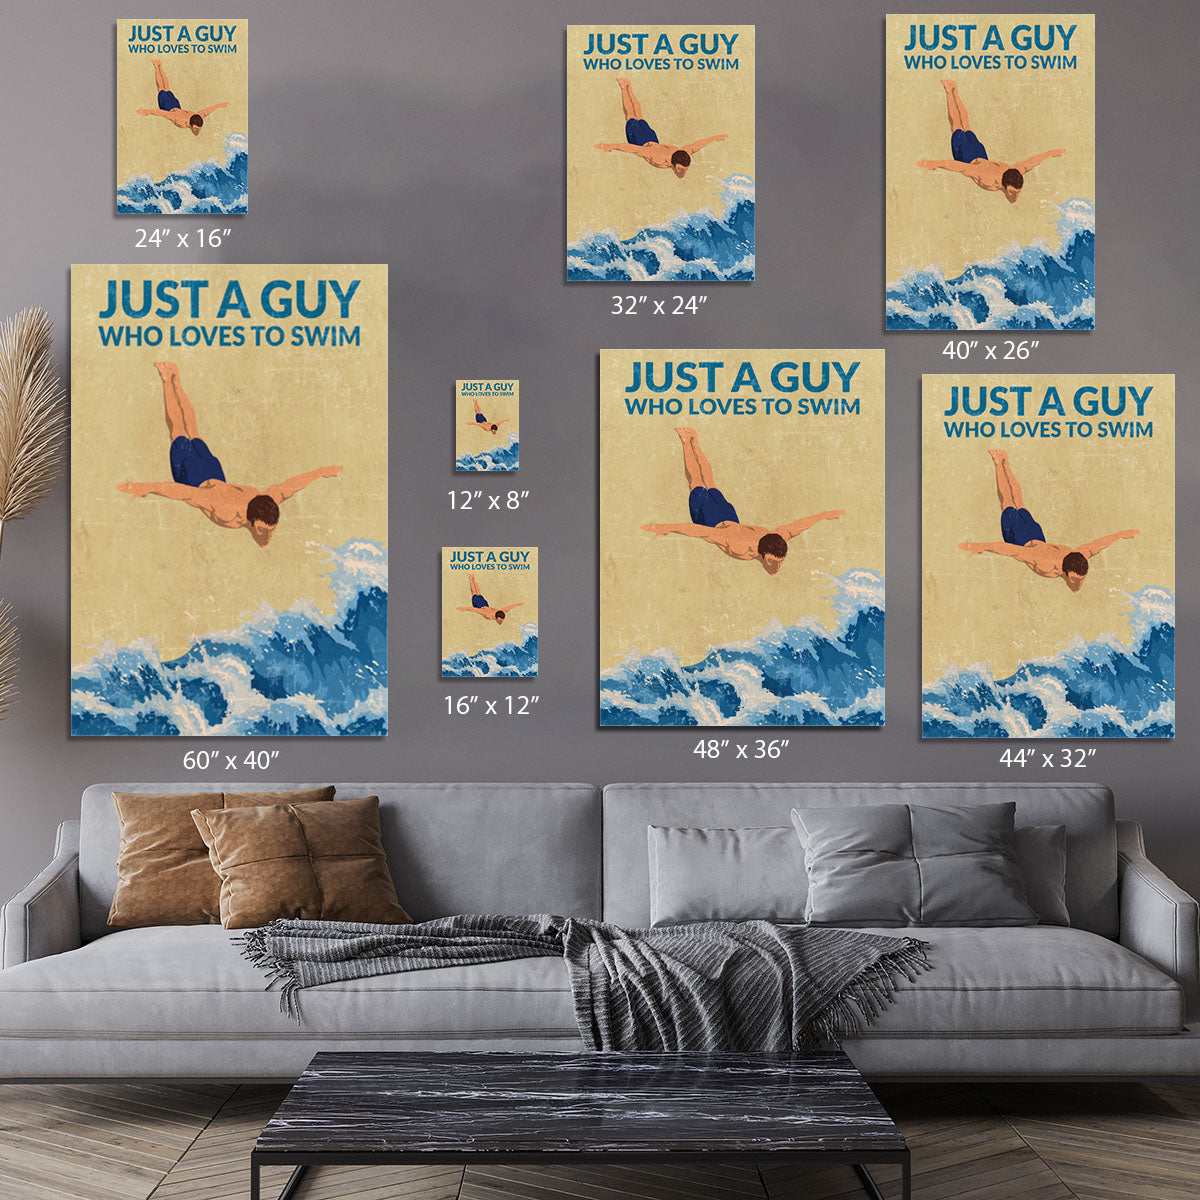 Just a Guy Who Loves To Swim blue Canvas Print or Poster - 1x - 7